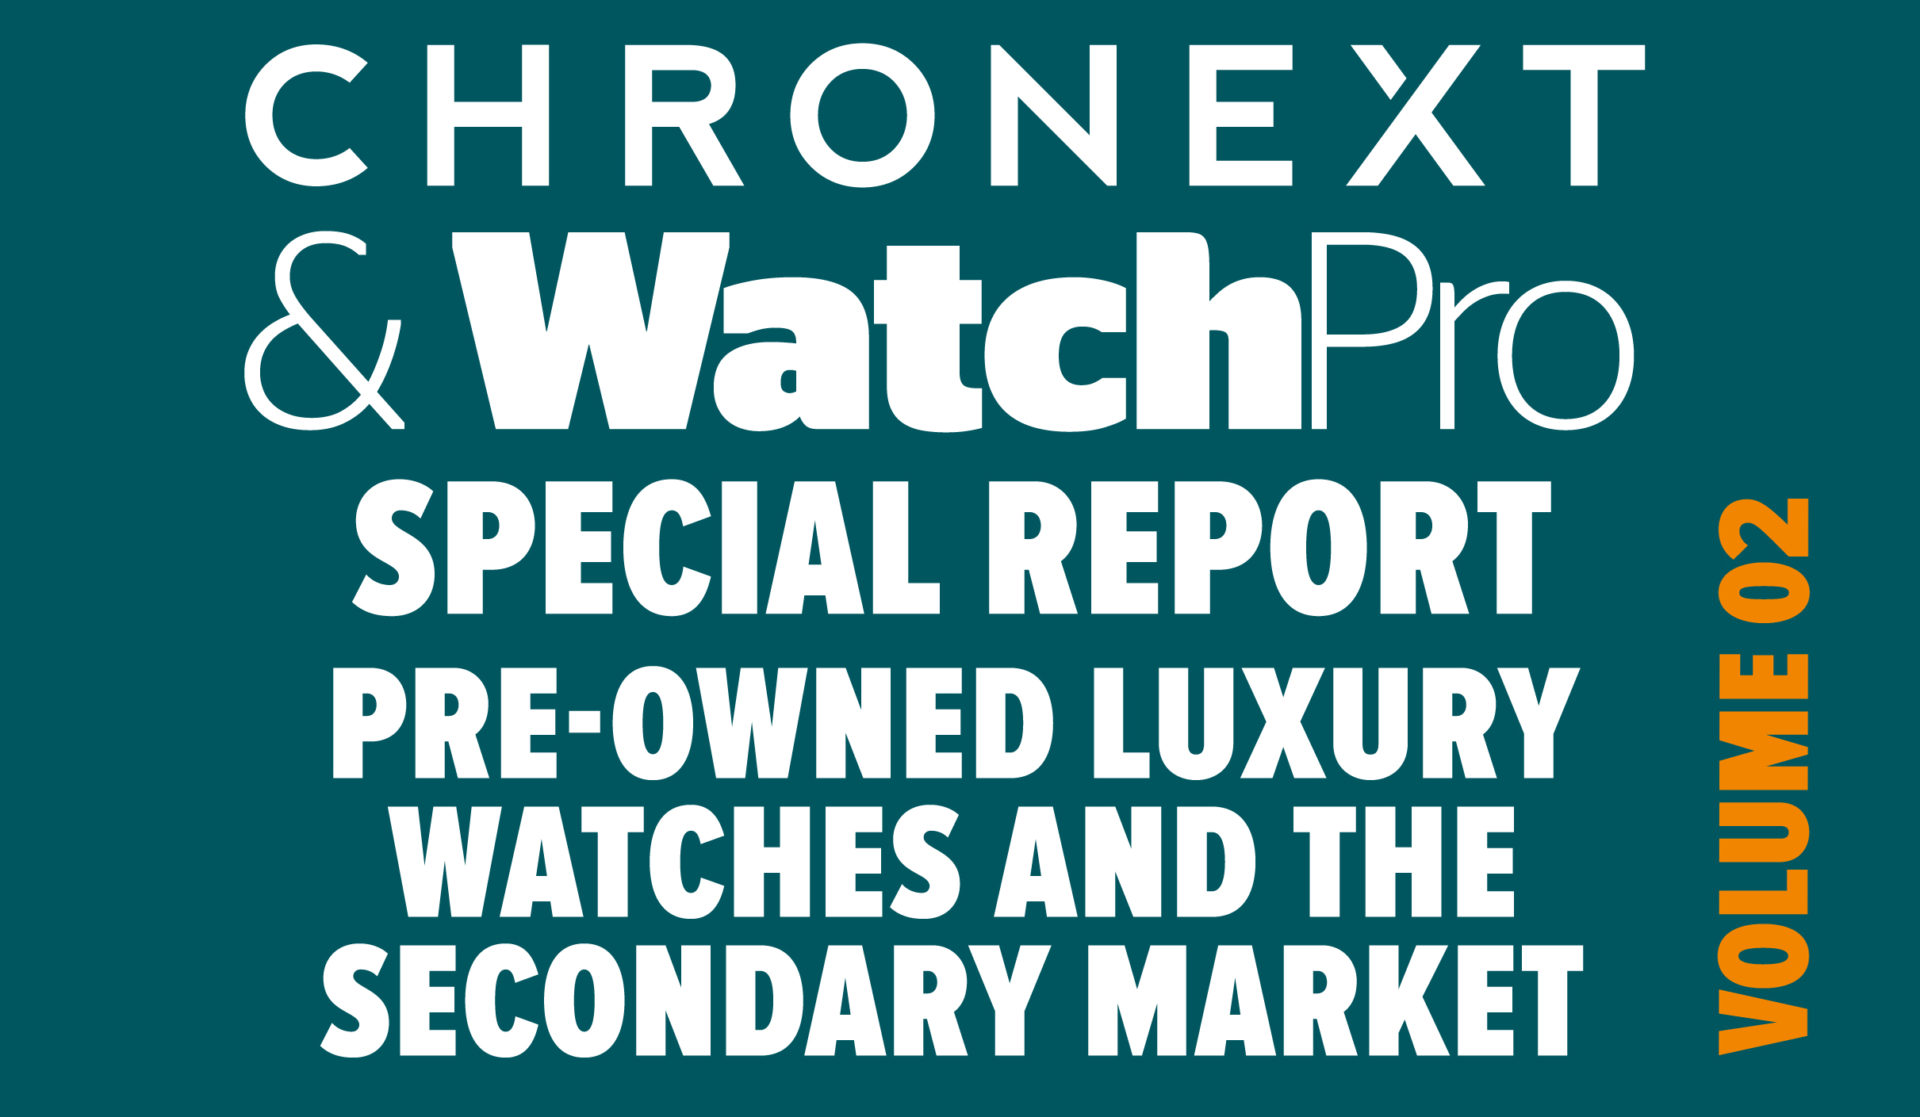 Chronext special report web image